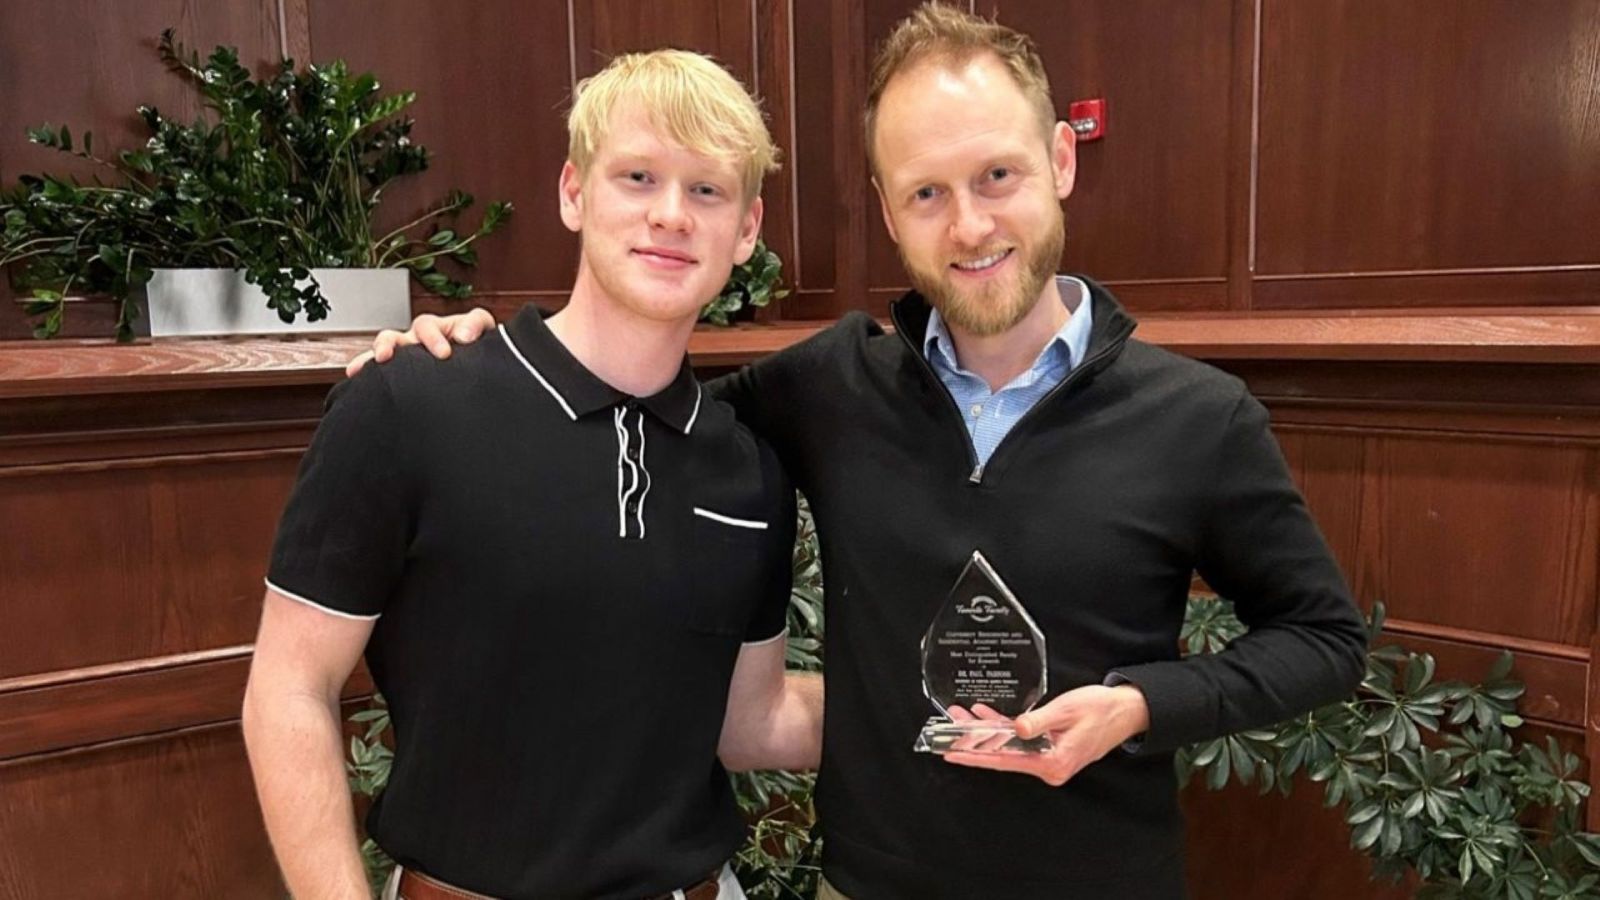 Paul Parsons with Jackson Murray, the UX student who nominated him. (Photo provided/Jackson Murray)